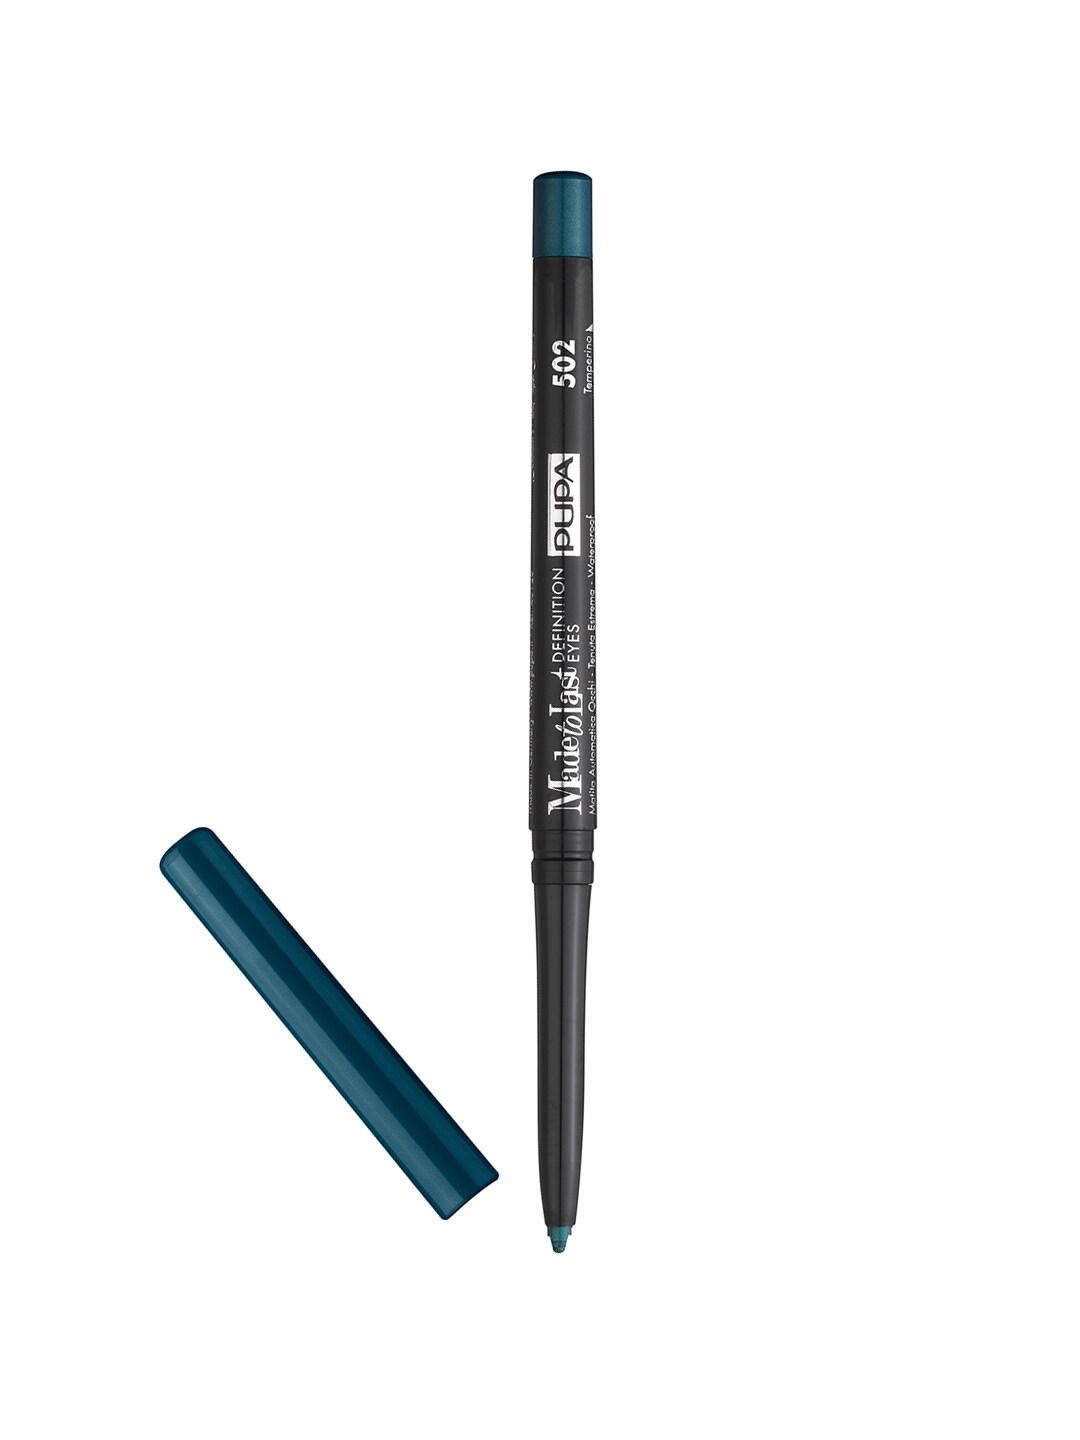 PUPA MILANO Made To Last Definition Eyes Automatic Eye Pencil - Elegant Peacock 502